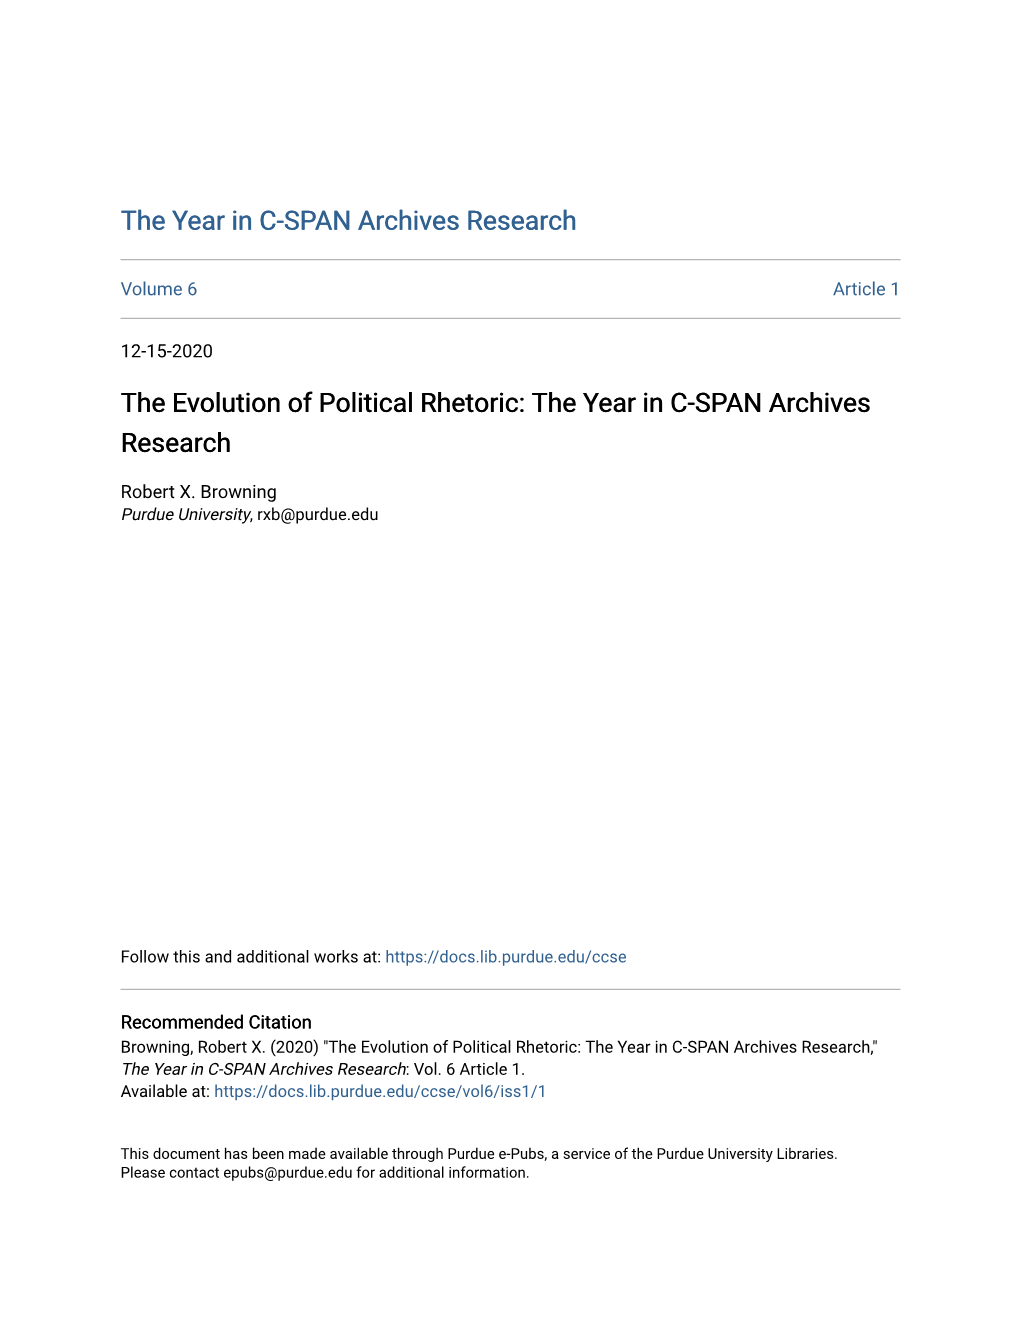 The Evolution of Political Rhetoric: the Year in C-SPAN Archives Research